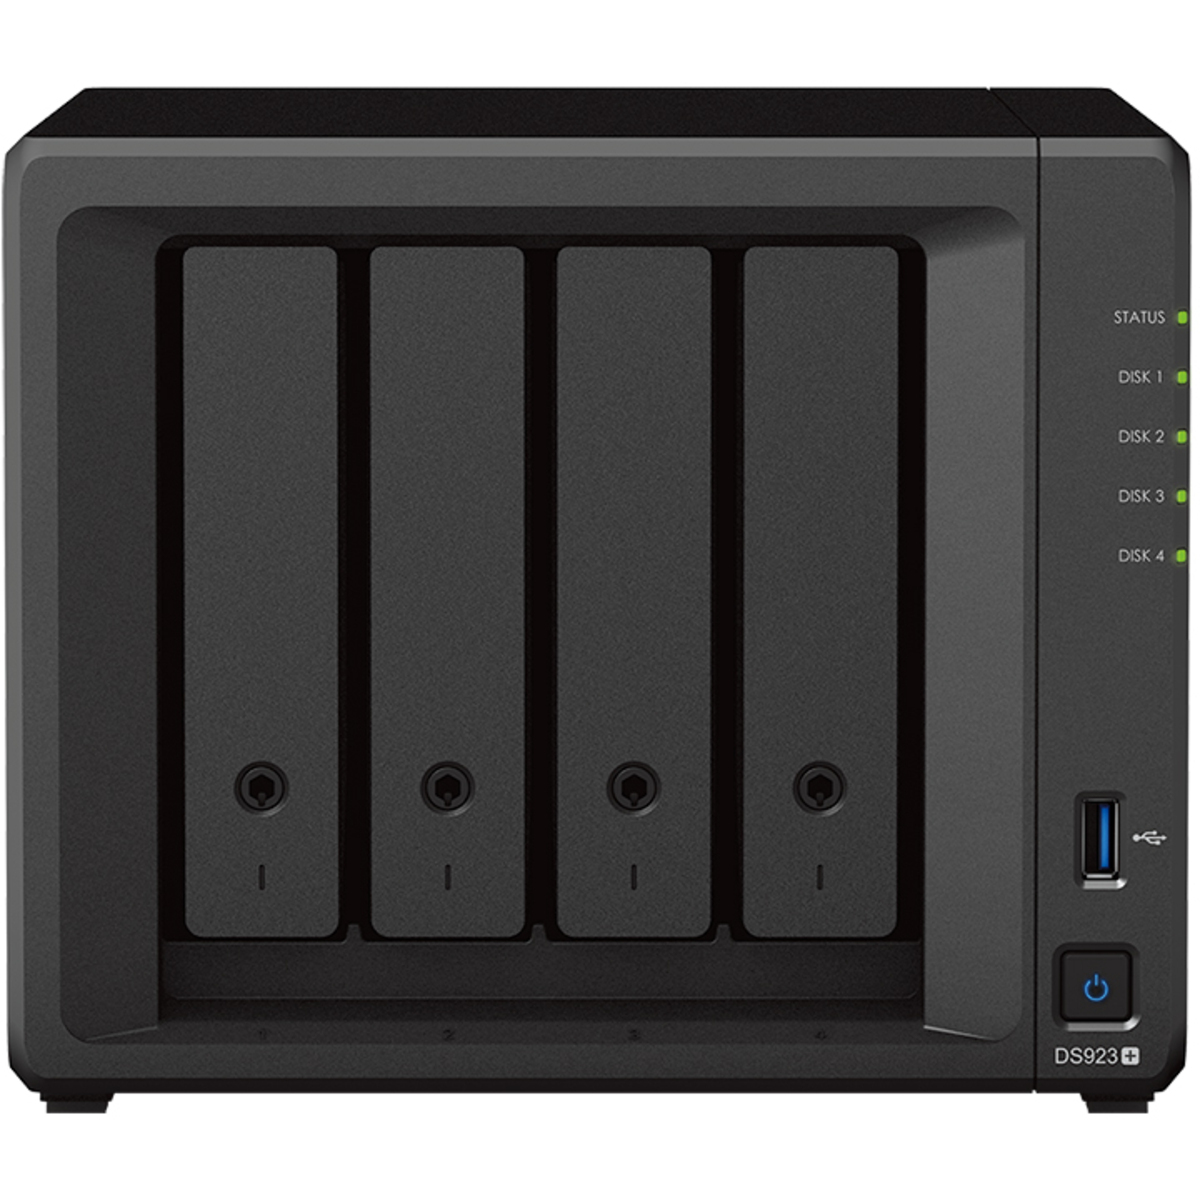 buy Synology DiskStation DS923+ 64tb Desktop NAS - Network Attached Storage Device 4x16000gb Seagate IronWolf Pro ST16000NT001 3.5 7200rpm SATA 6Gb/s HDD NAS Class Drives Installed - Burn-In Tested - ON SALE - FREE RAM UPGRADE - nas headquarters buy network attached storage server device das new raid-5 free shipping simply usa christmas holiday black friday cyber monday week sale happening now! DiskStation DS923+